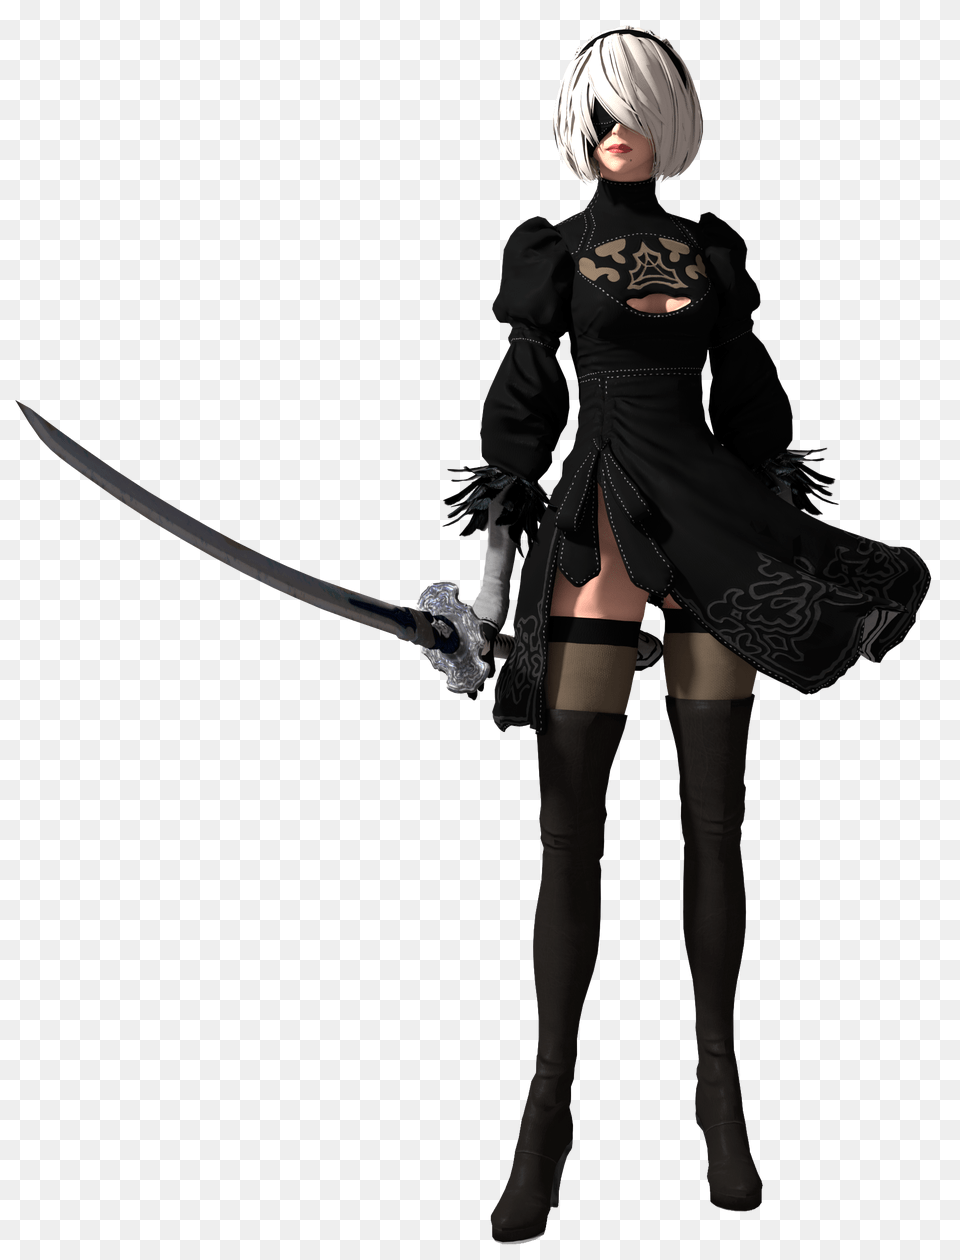 Adult, Weapon, Sword, Person Png Image